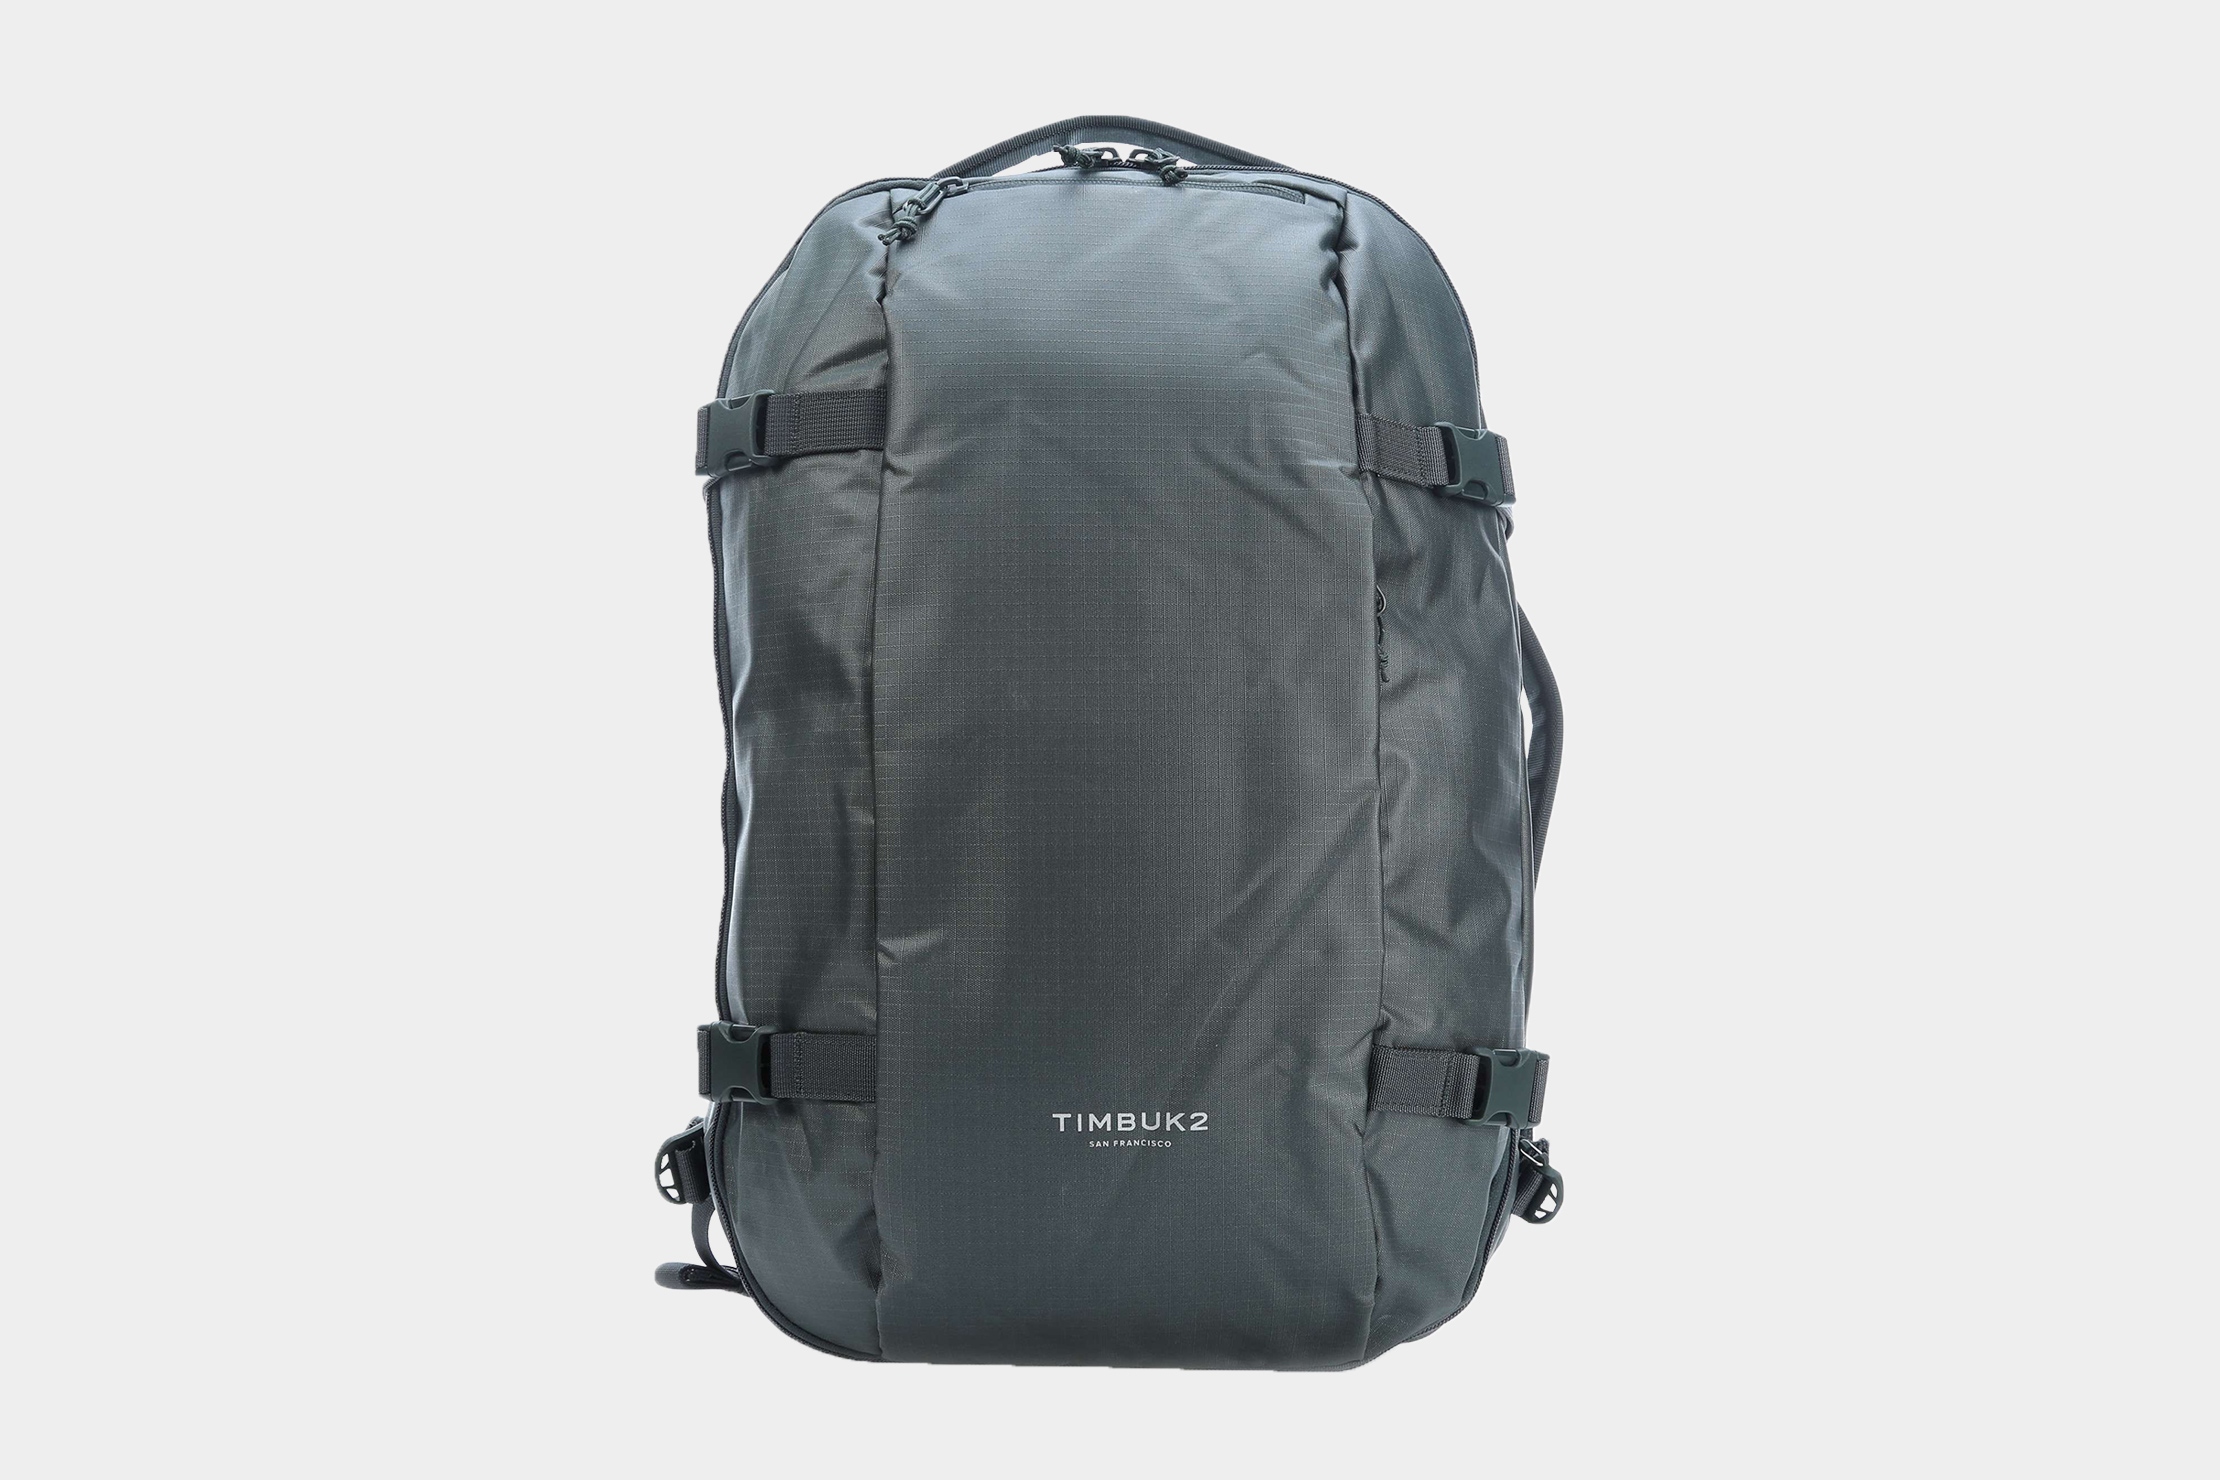 Timbuk2 Wander Pack Review (Carry-on) | Pack Hacker